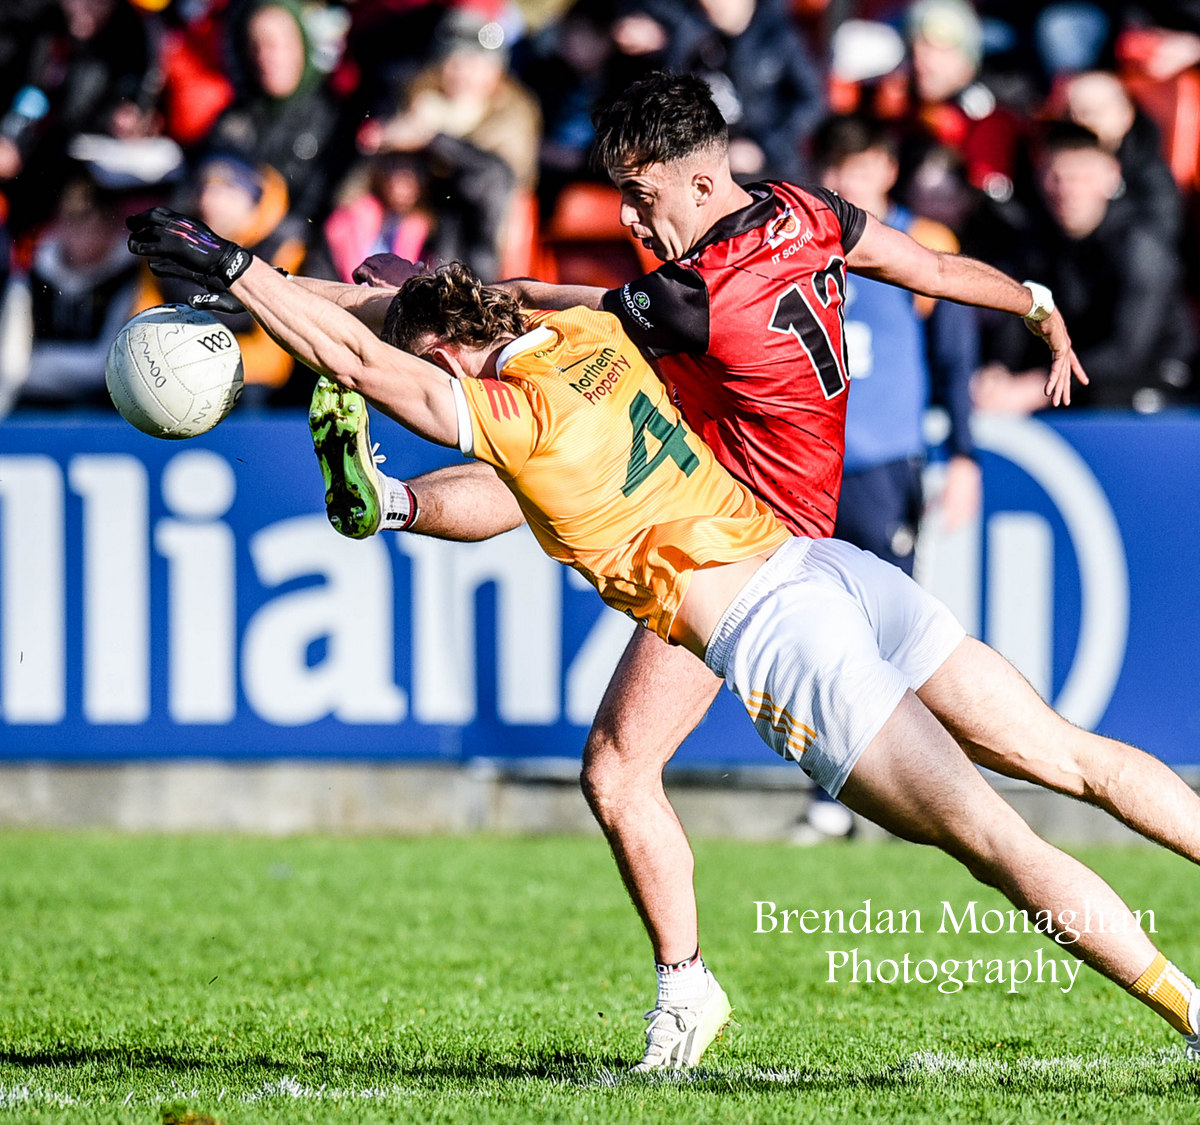 Is there a Block of the week competition @UlsterGAA @AontroimGAA @officialdowngaa